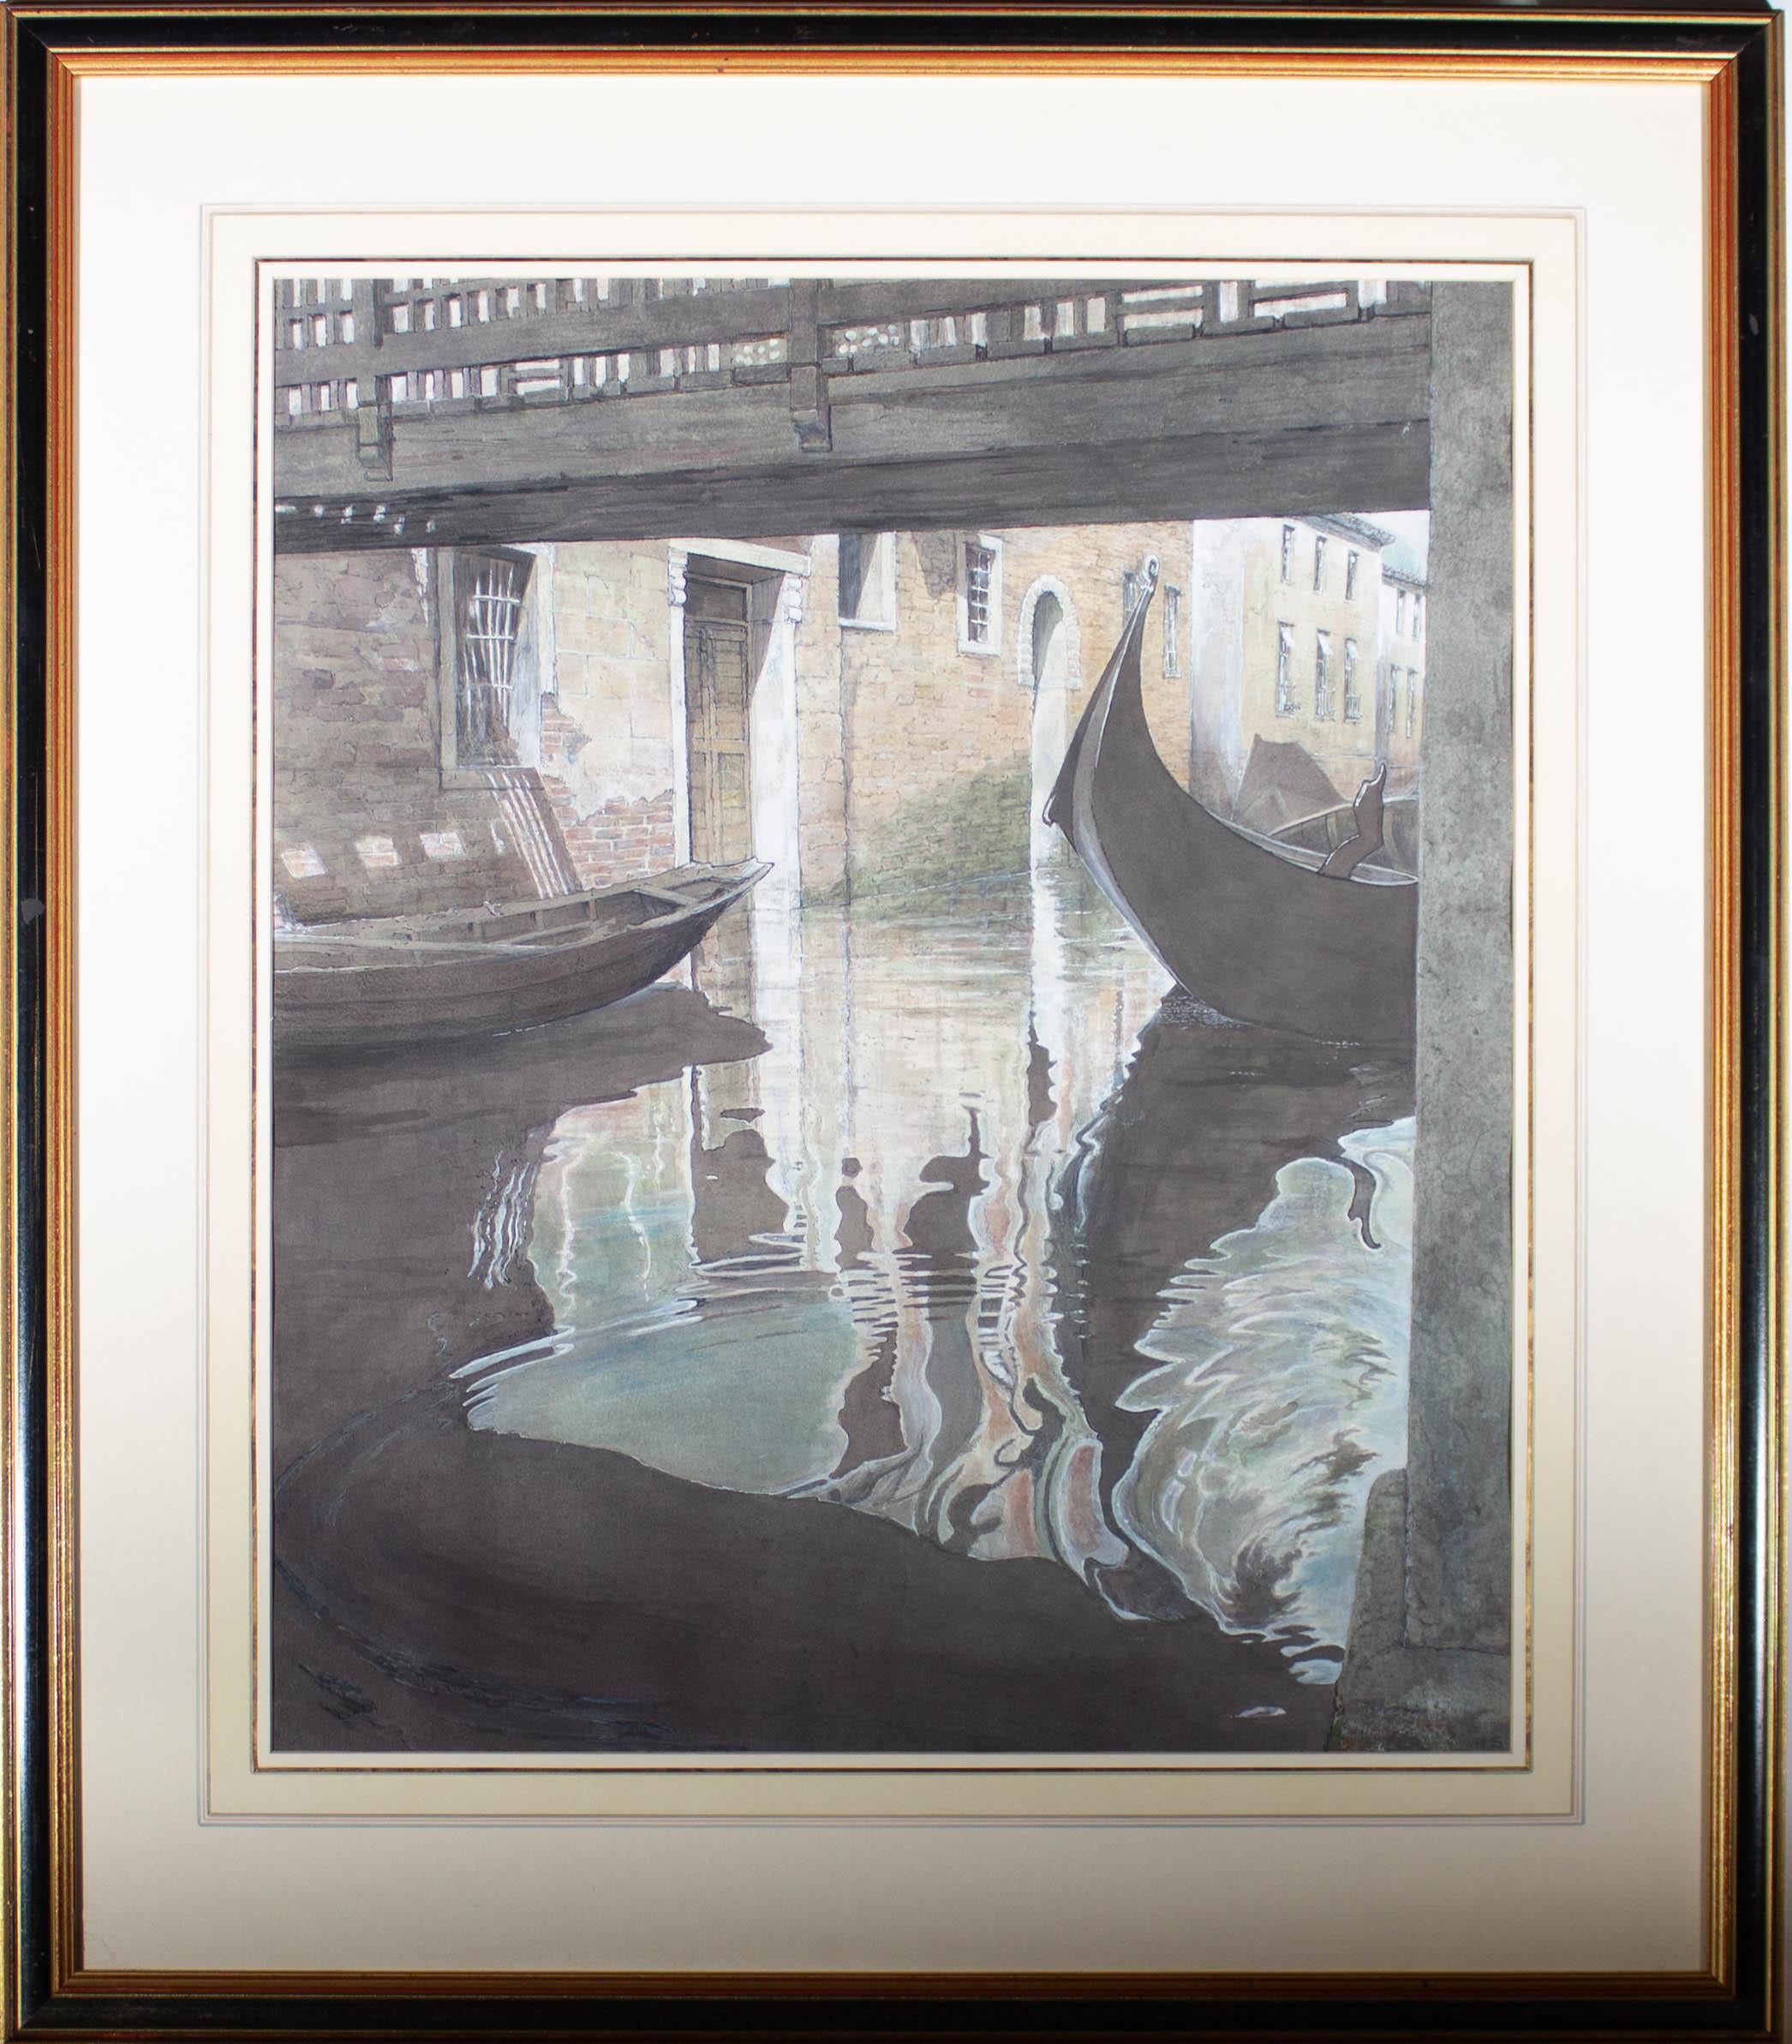 A moody and atmospheric 20th Century watercolour of good size, showing an unusual view of the back water canal of Venice. The artist focuses on the swirling water of the canal, rather than the beautiful architecture around it. The scene is filled